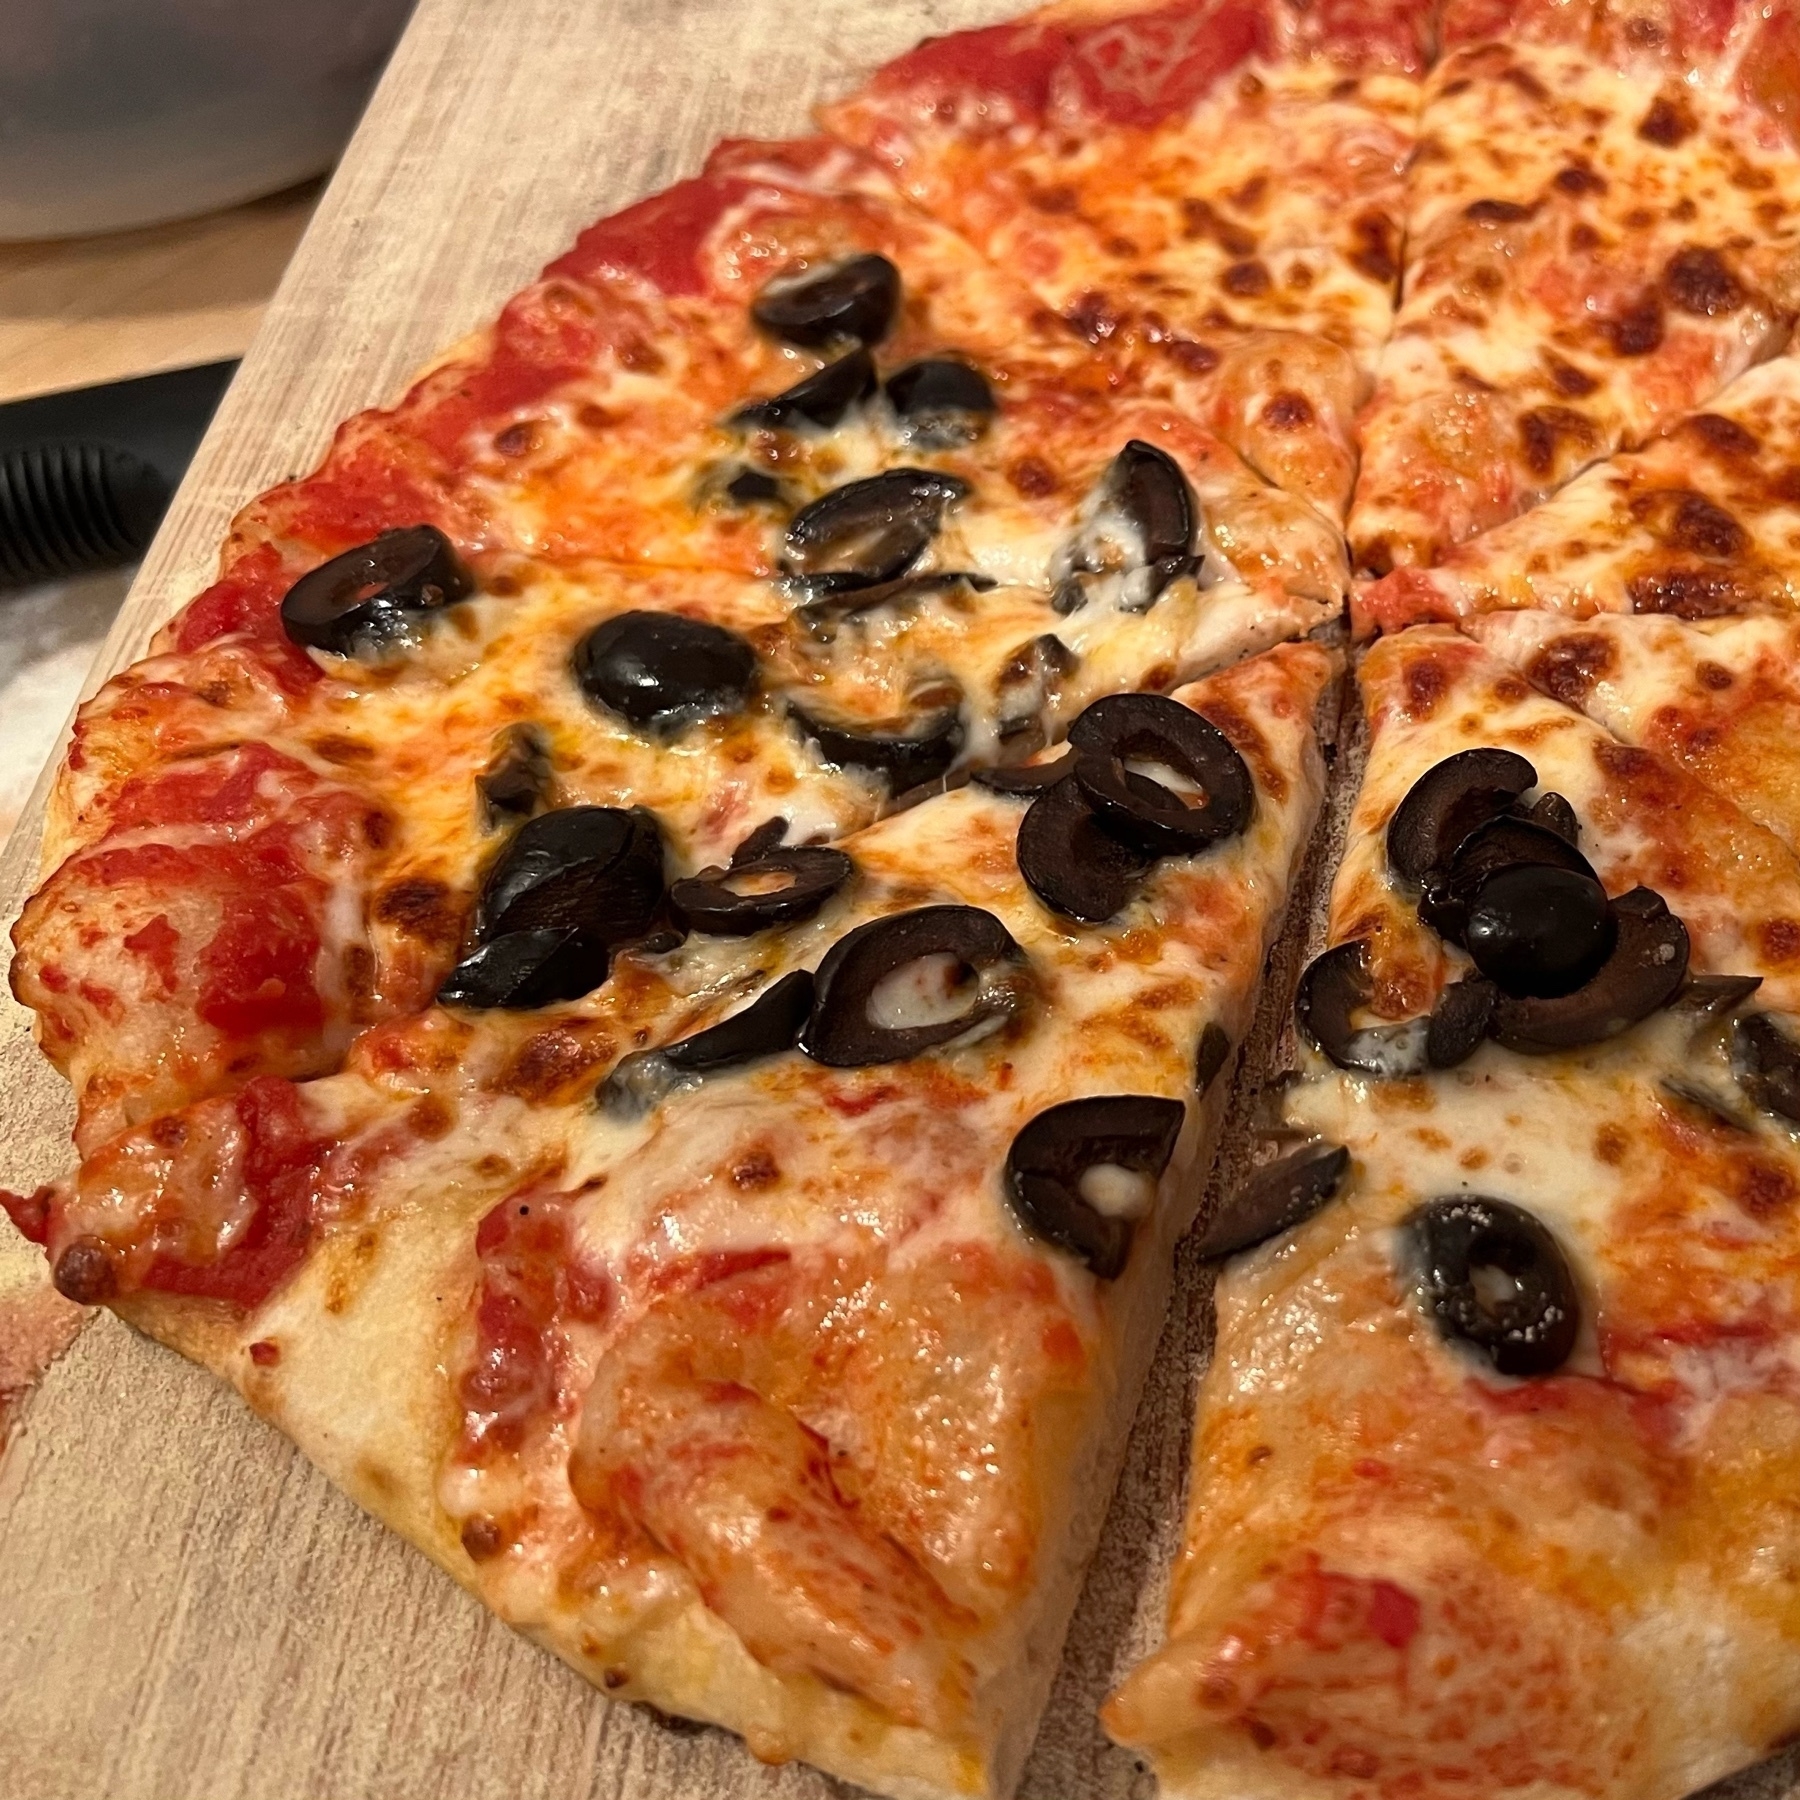 Homemade pizza with puffy crust and black olives